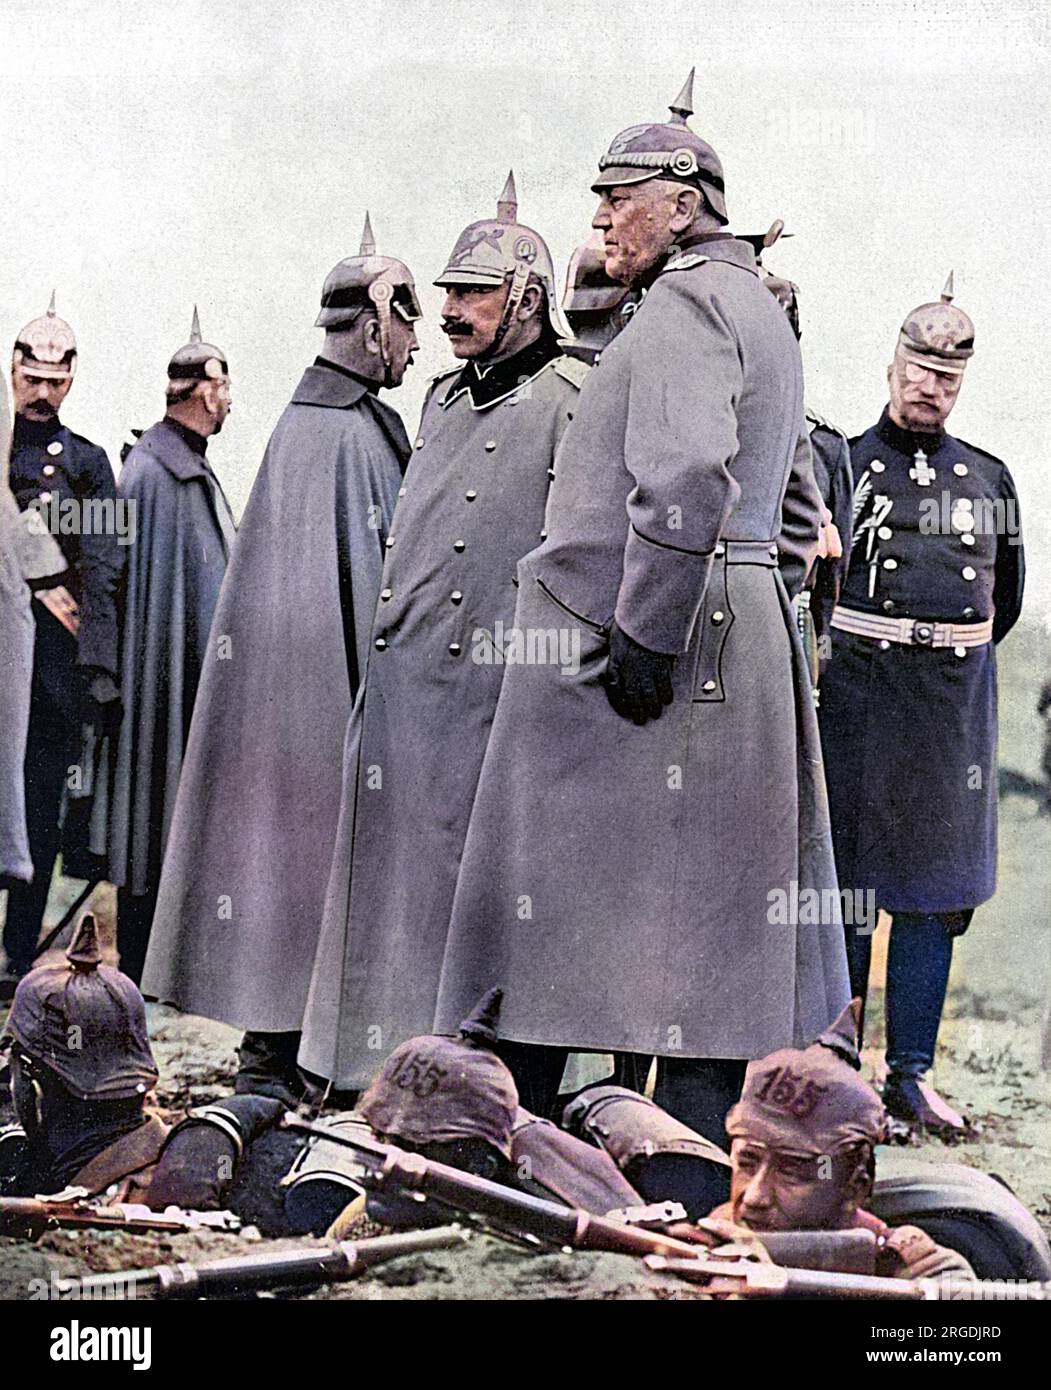 The Chief of General Staff, General Helmuth von Moltke and Kaiser Wilhelm II of Germany observing the German troops in training. Stock Photo